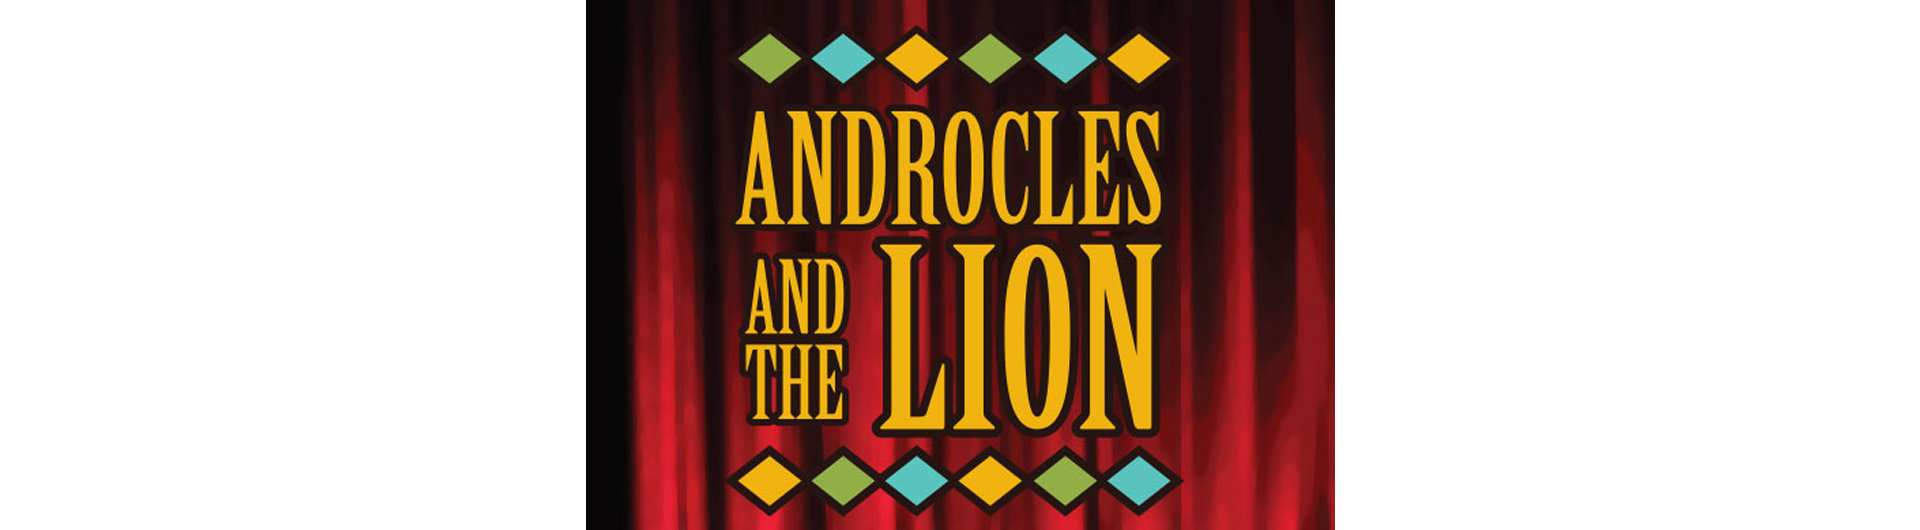 Androcles and the Lion title graphic